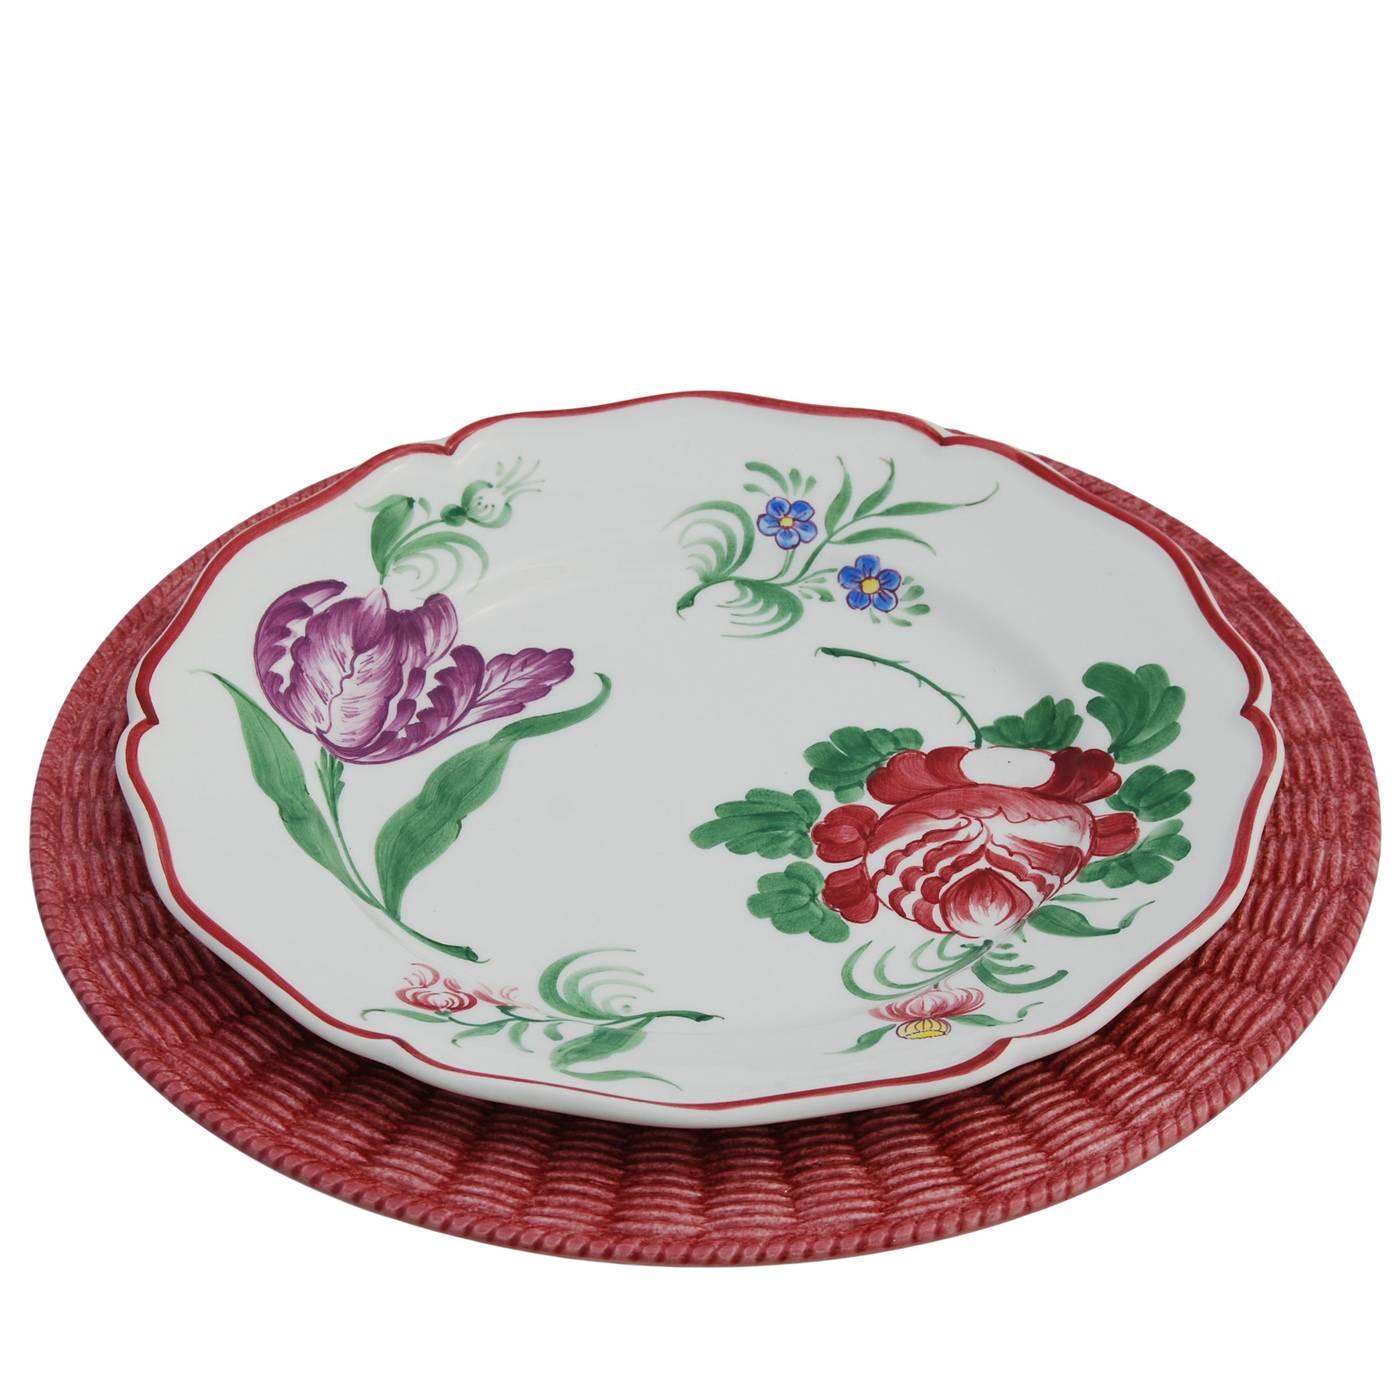 This is a set of four large plates conceived as placeholders, to be left as base as courses change, finished in a rich shade of wine rose with a sponge effect. The pieces are characterized by Este Ceramiche’s signature wicker border, flawlessly